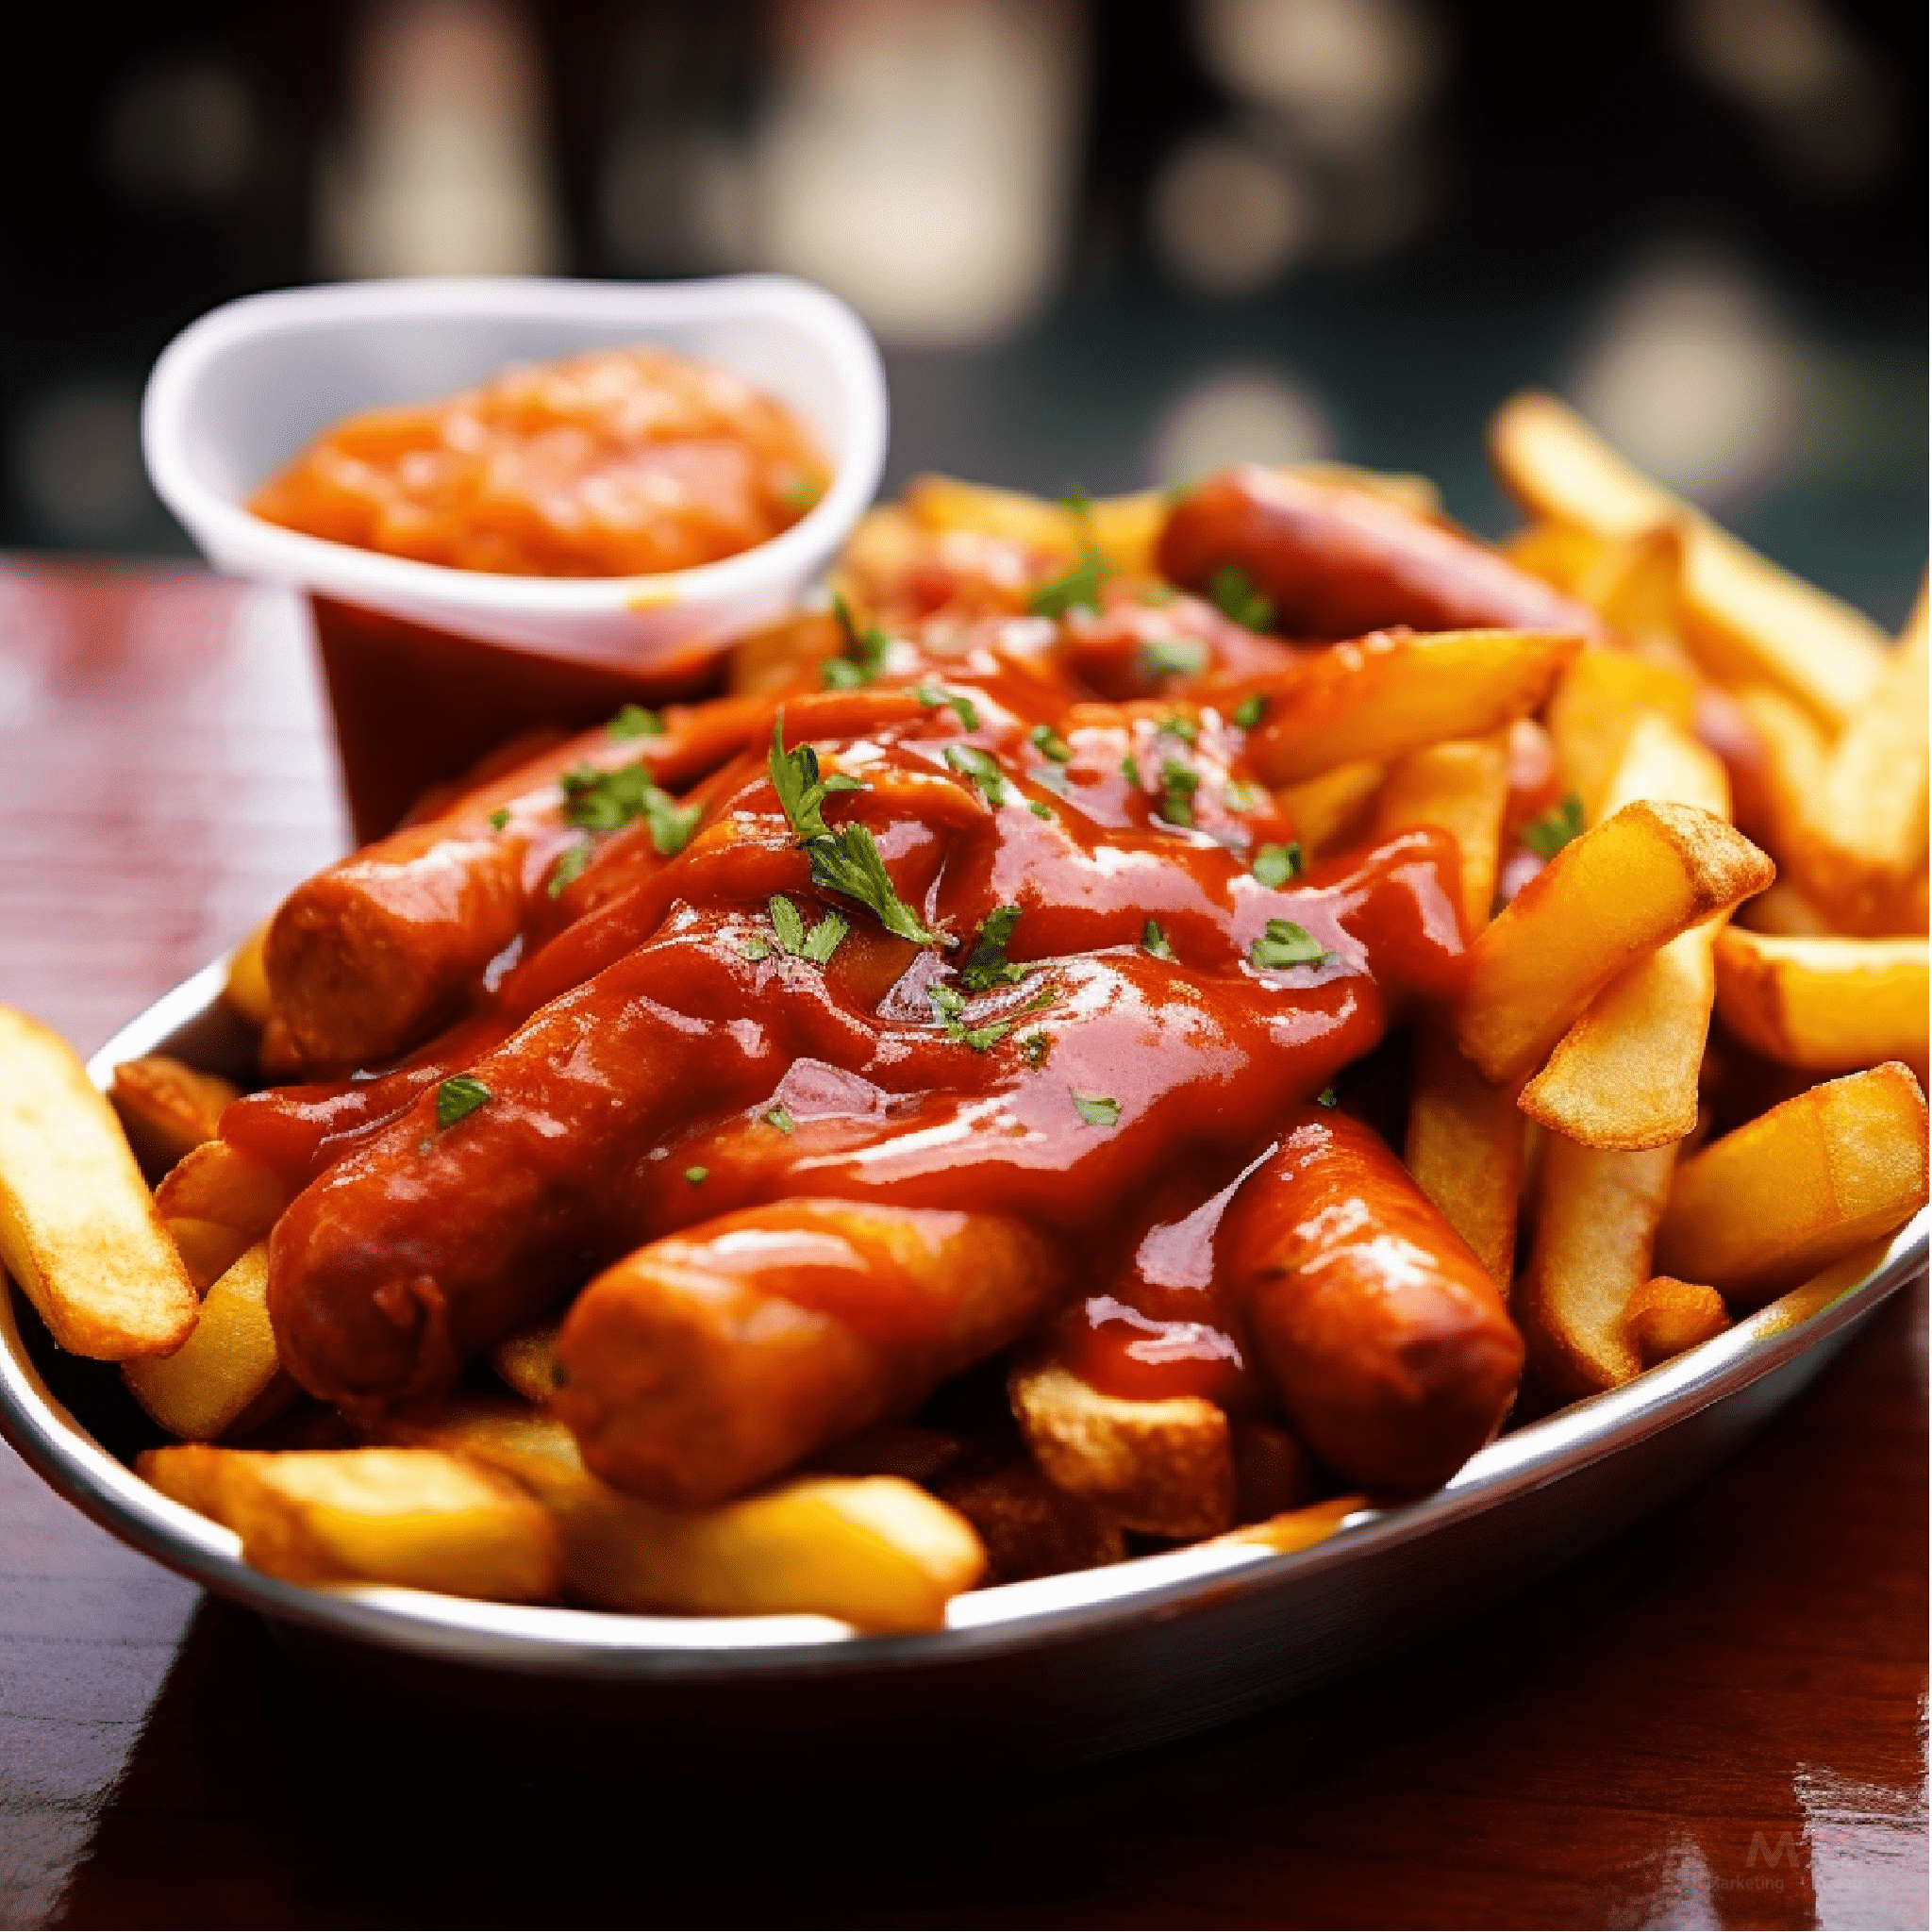 Currywurst (Germany): A beloved German street food, currywurst consists of sliced sausages served with fries and curry ketchup.